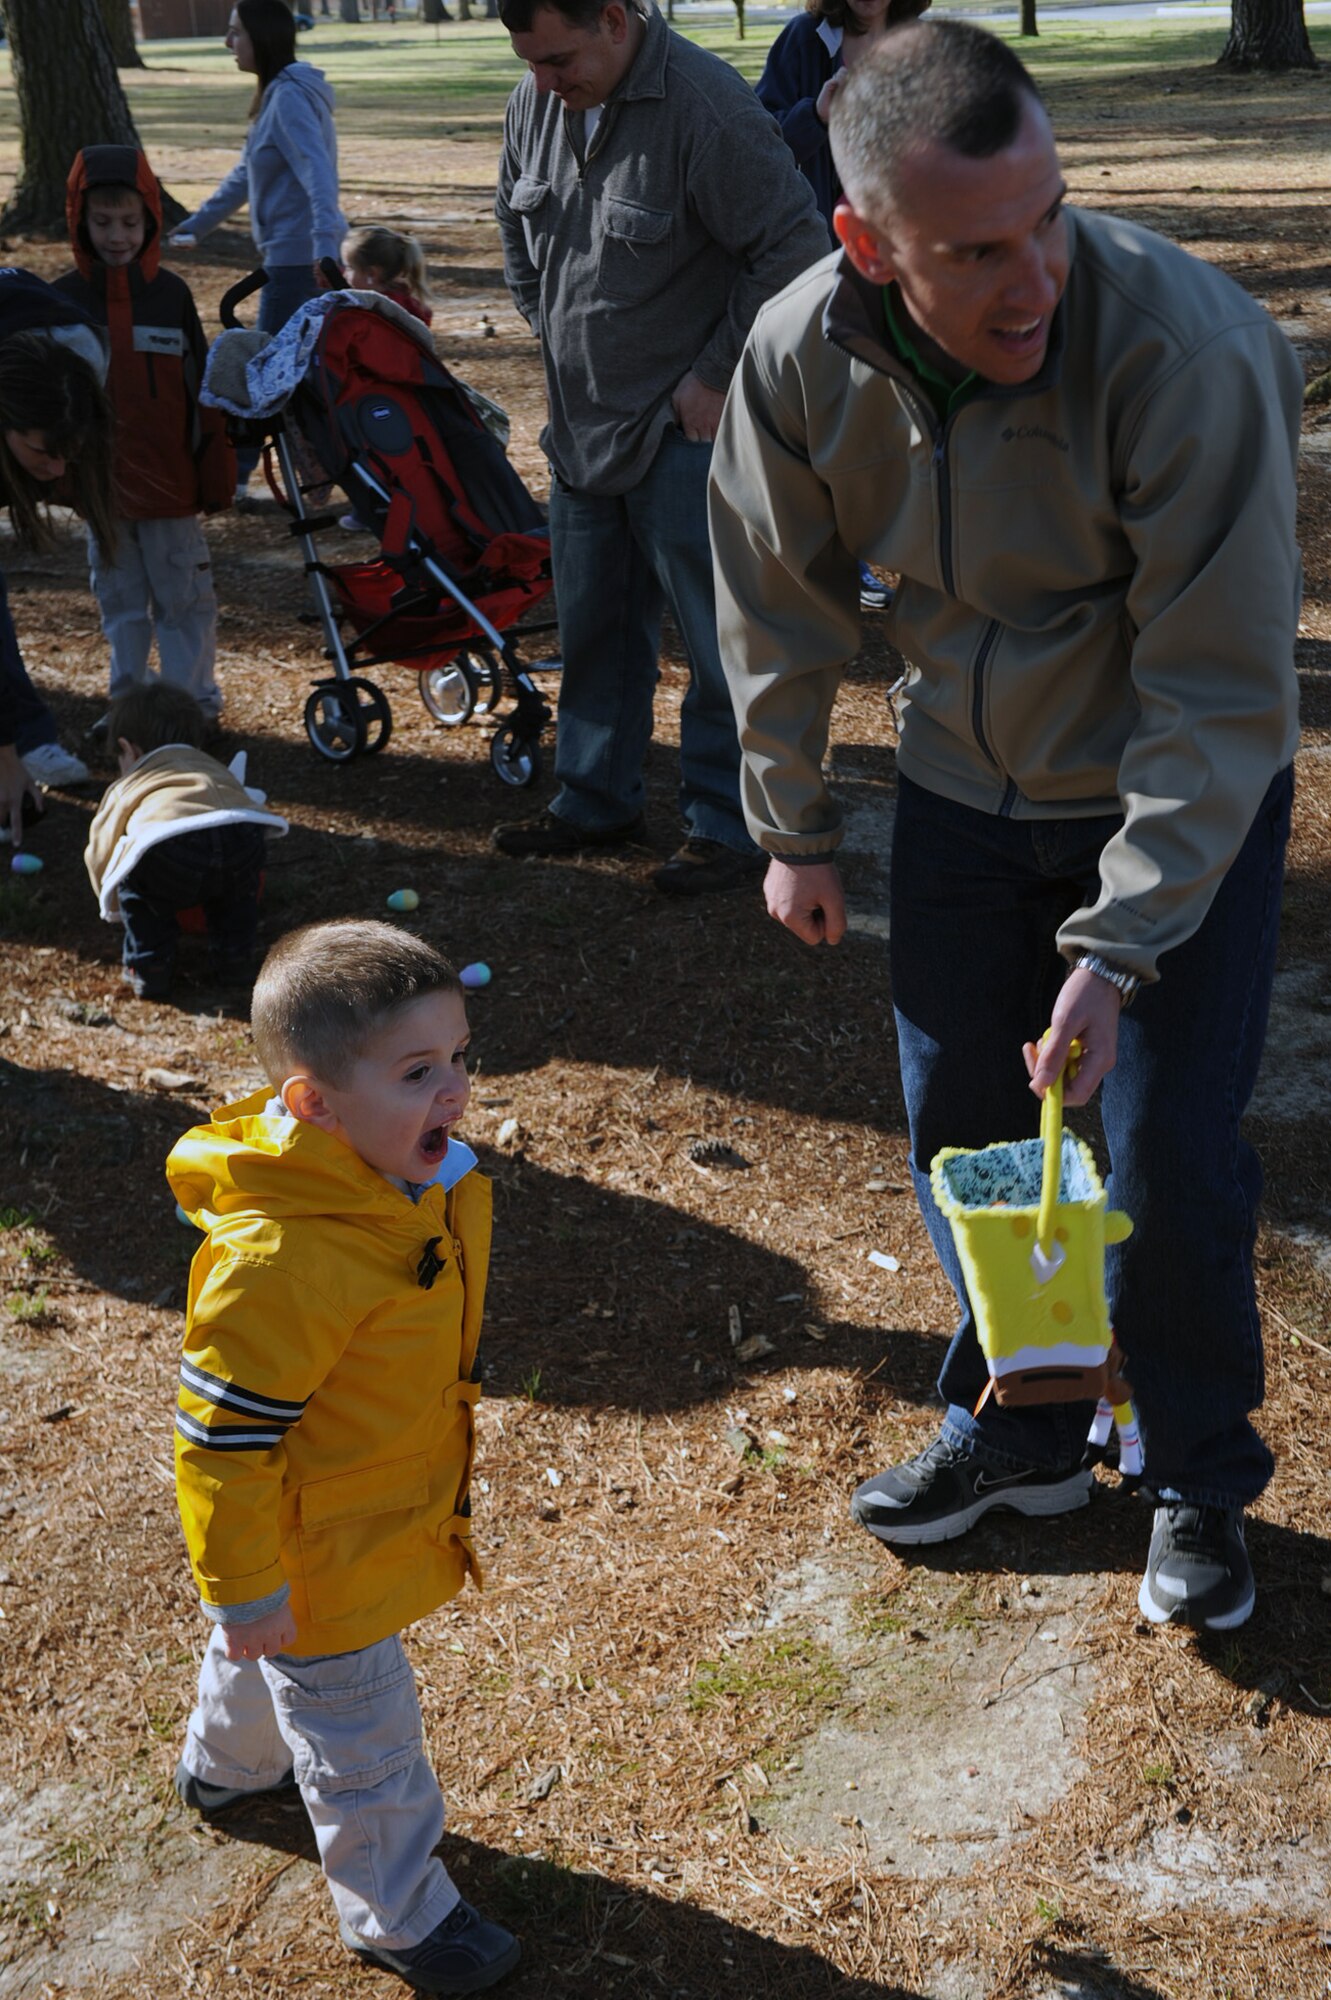 Capt. Joshua Connell, 4th Civil Engineer Squadron Explosive Ordnance Disposal flight commander, helps his son Andrew, 2, find eggs at Debden Park during the base Easter egg hunt on Seymour Johnson Air Force Base, N.C., March 27, 2010. The event also featured a cakewalk where winners won a homemade cake. (U.S. Air Force photo/Senior Airman Ciara Wymbs) 